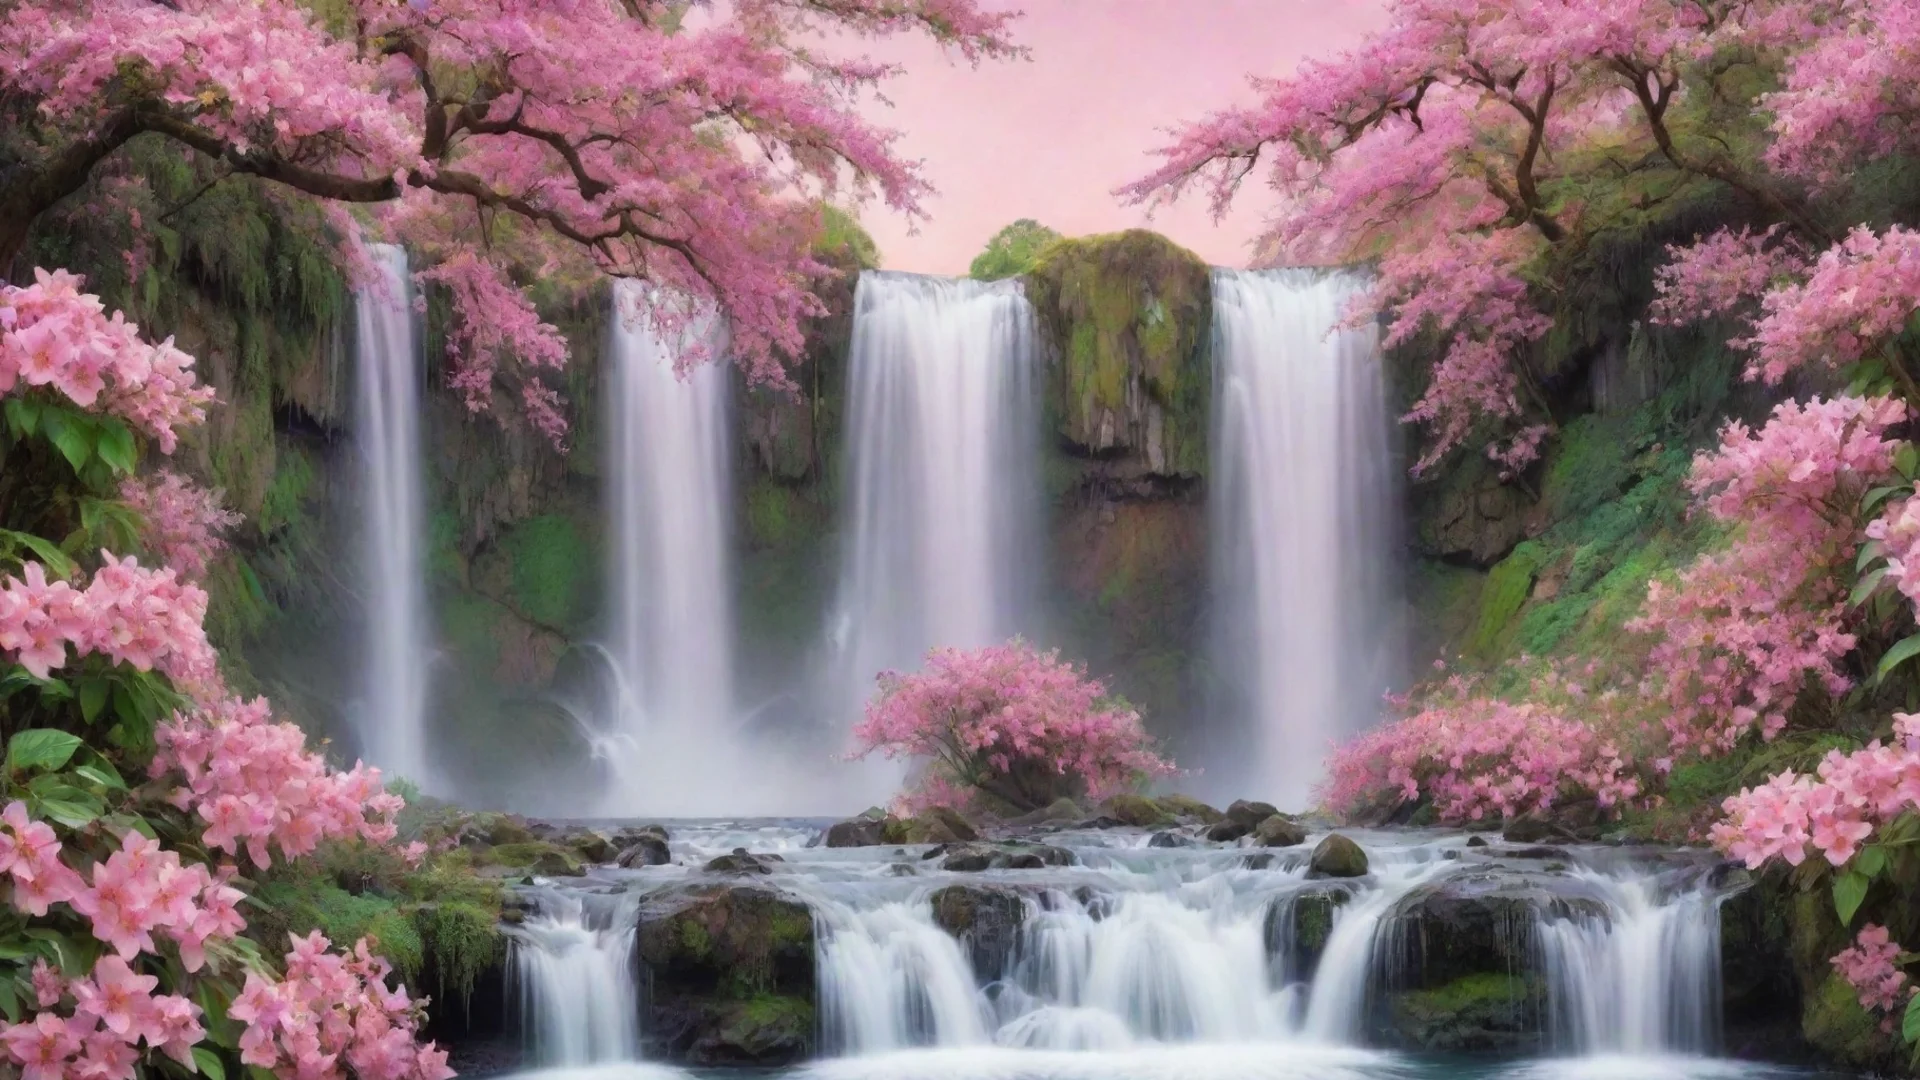 aiartstation art lovely waterfall pastel pinks greenery flowers overwhelming amazing hd starry colors confident engaging wow 3 hdwidescreen